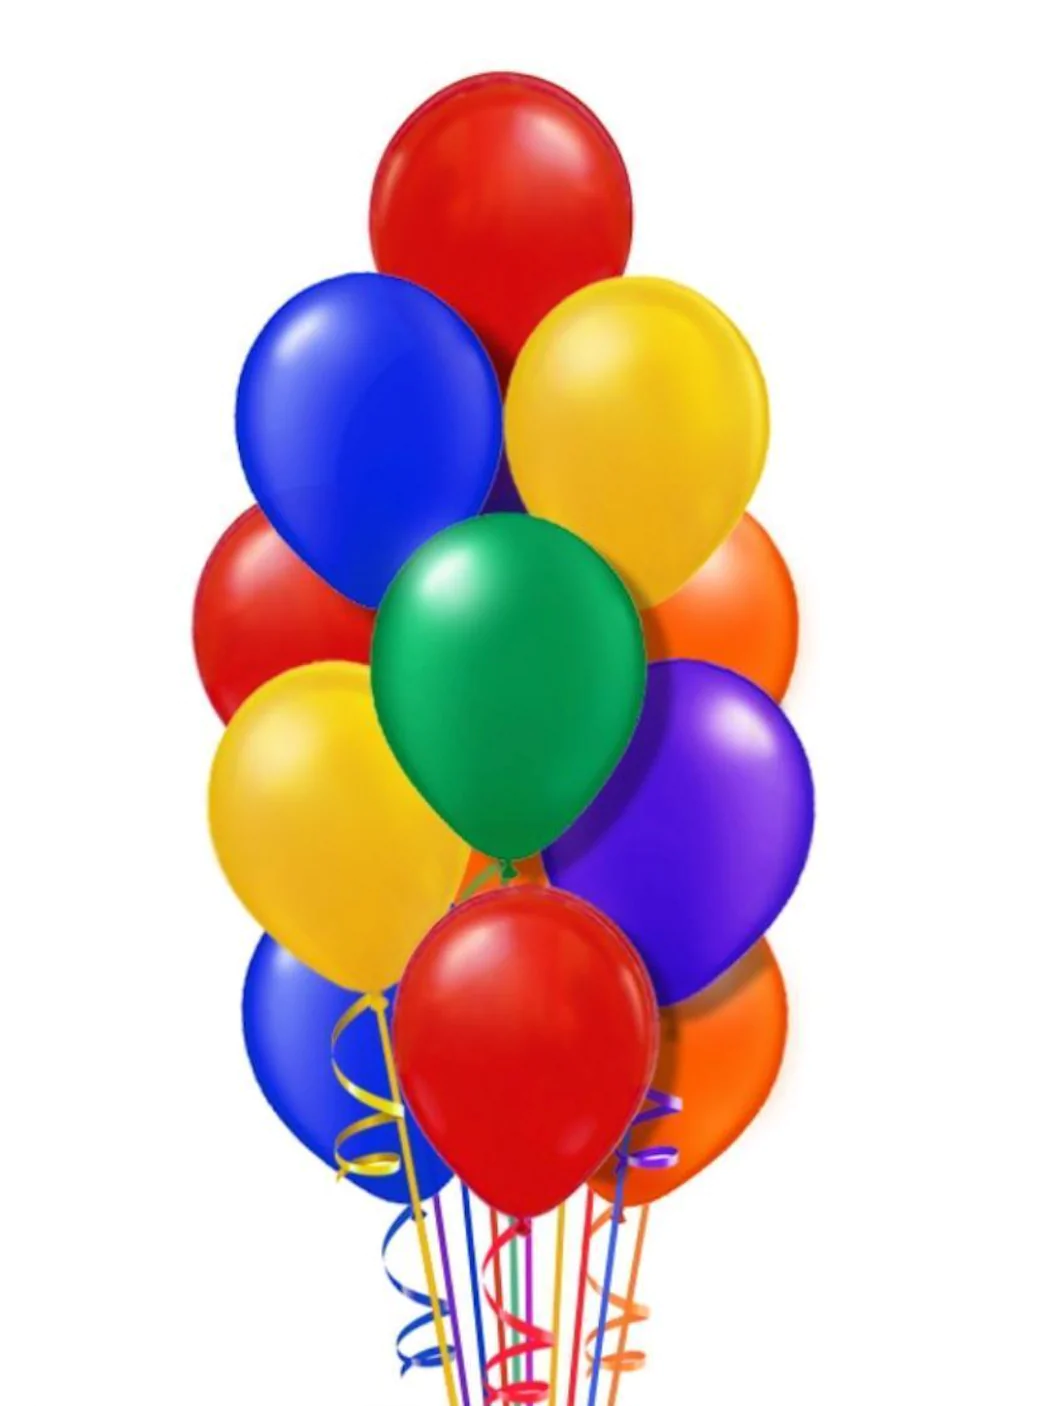 geloof Hoopvol Snikken Helium filled latex balloons in Tampa | delivery service in Florida